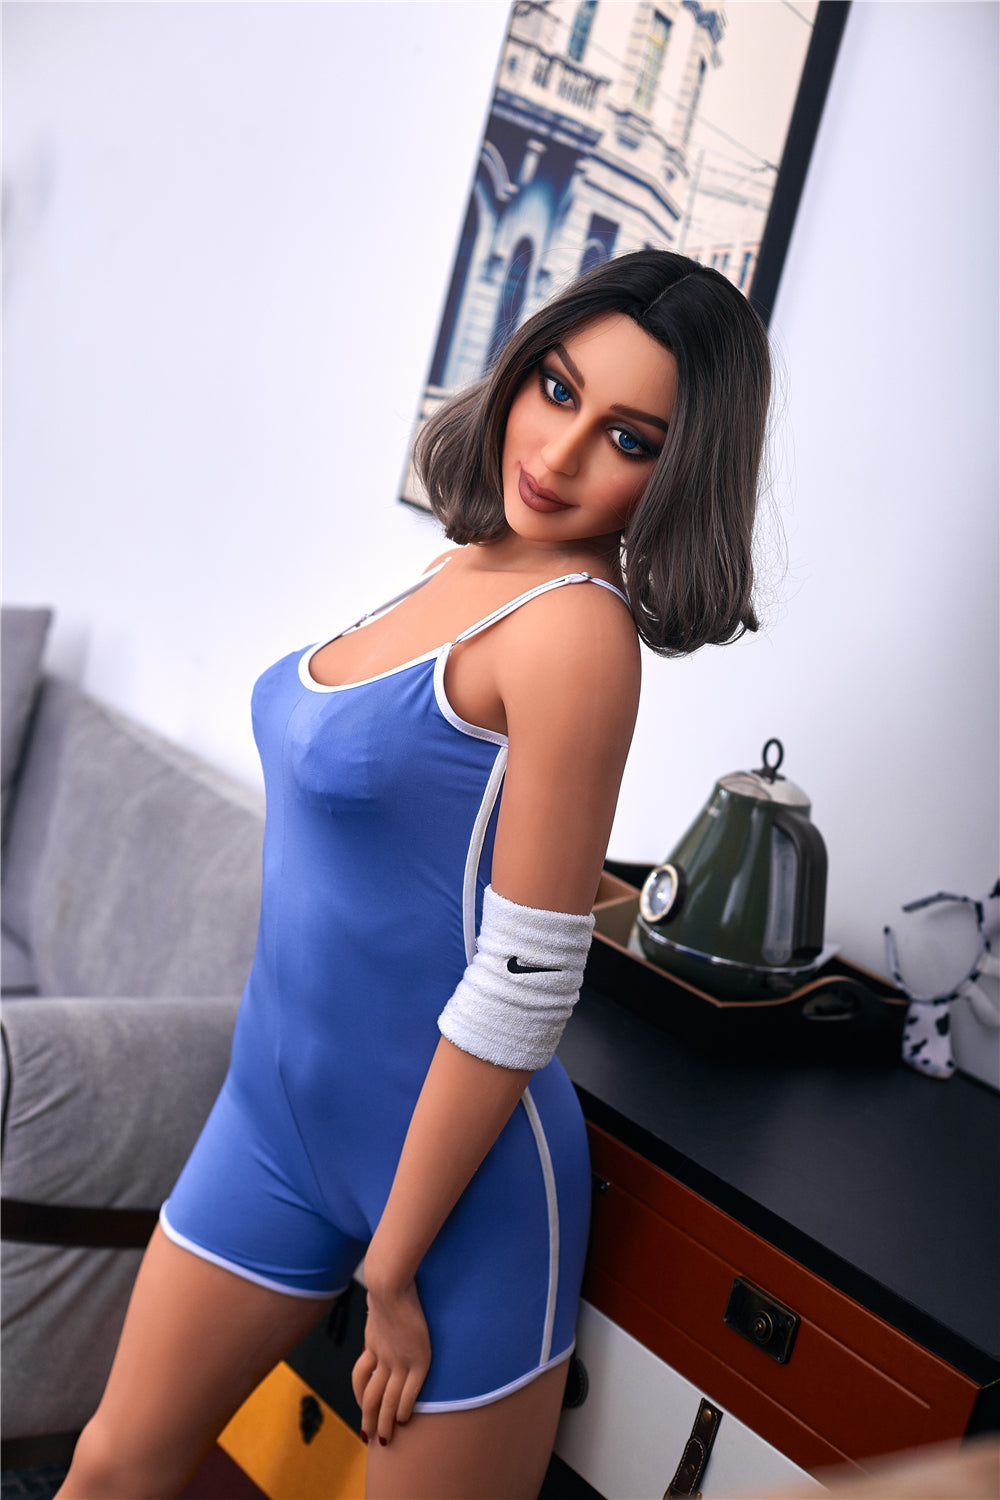 Irontech Doll 168 cm C TPE - Gwendolyn | Buy Sex Dolls at DOLLS ACTUALLY